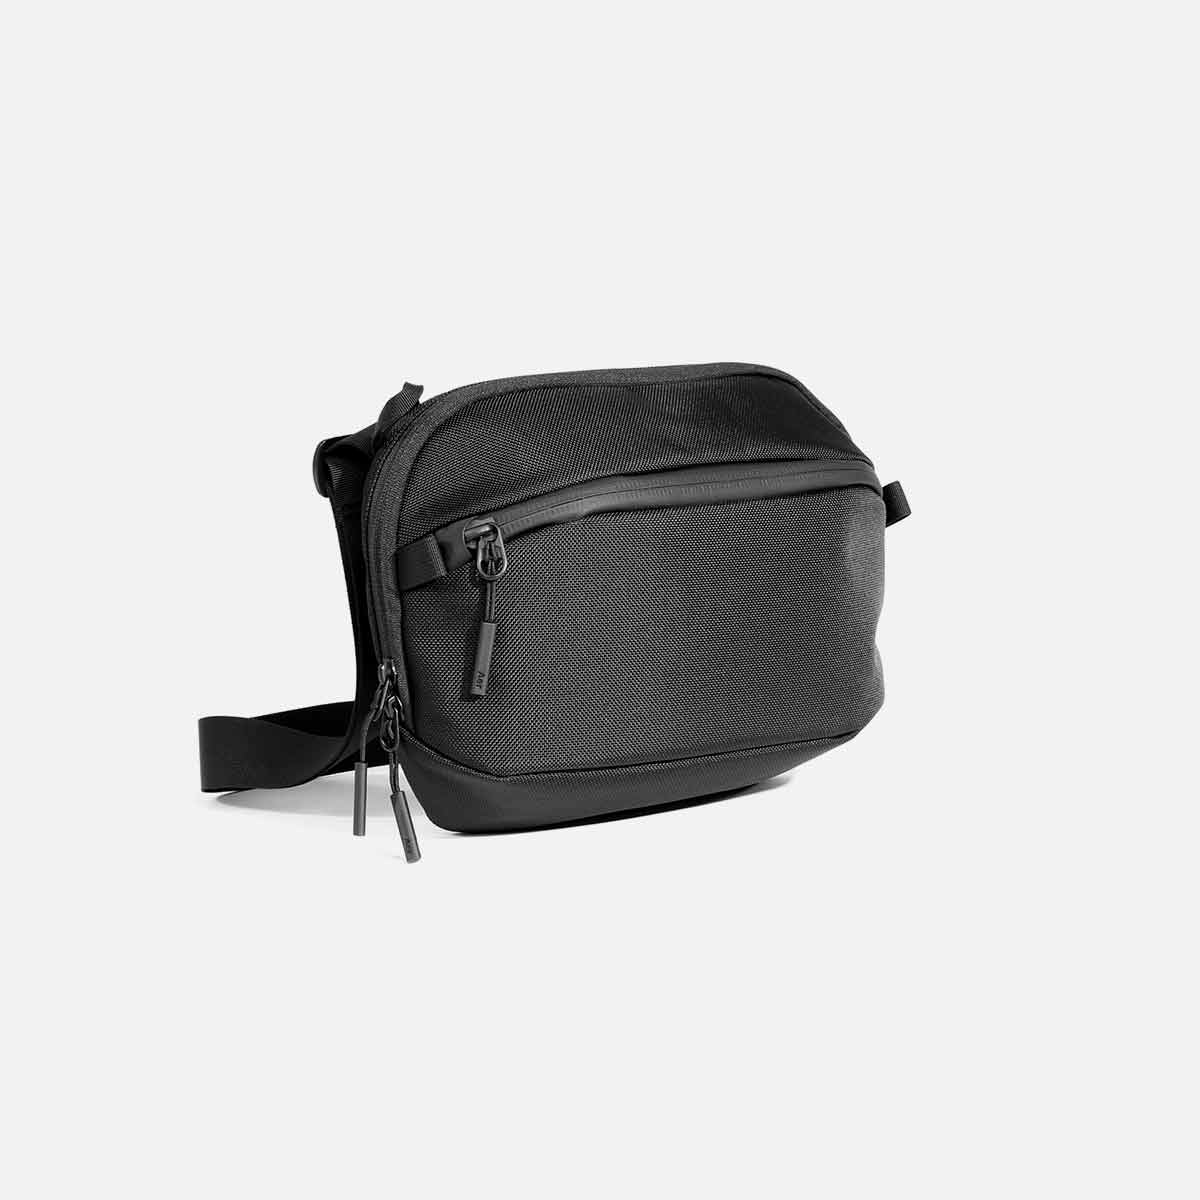 Day Sling 3 Max Black | Aer ｜ エアー公式通販サイト